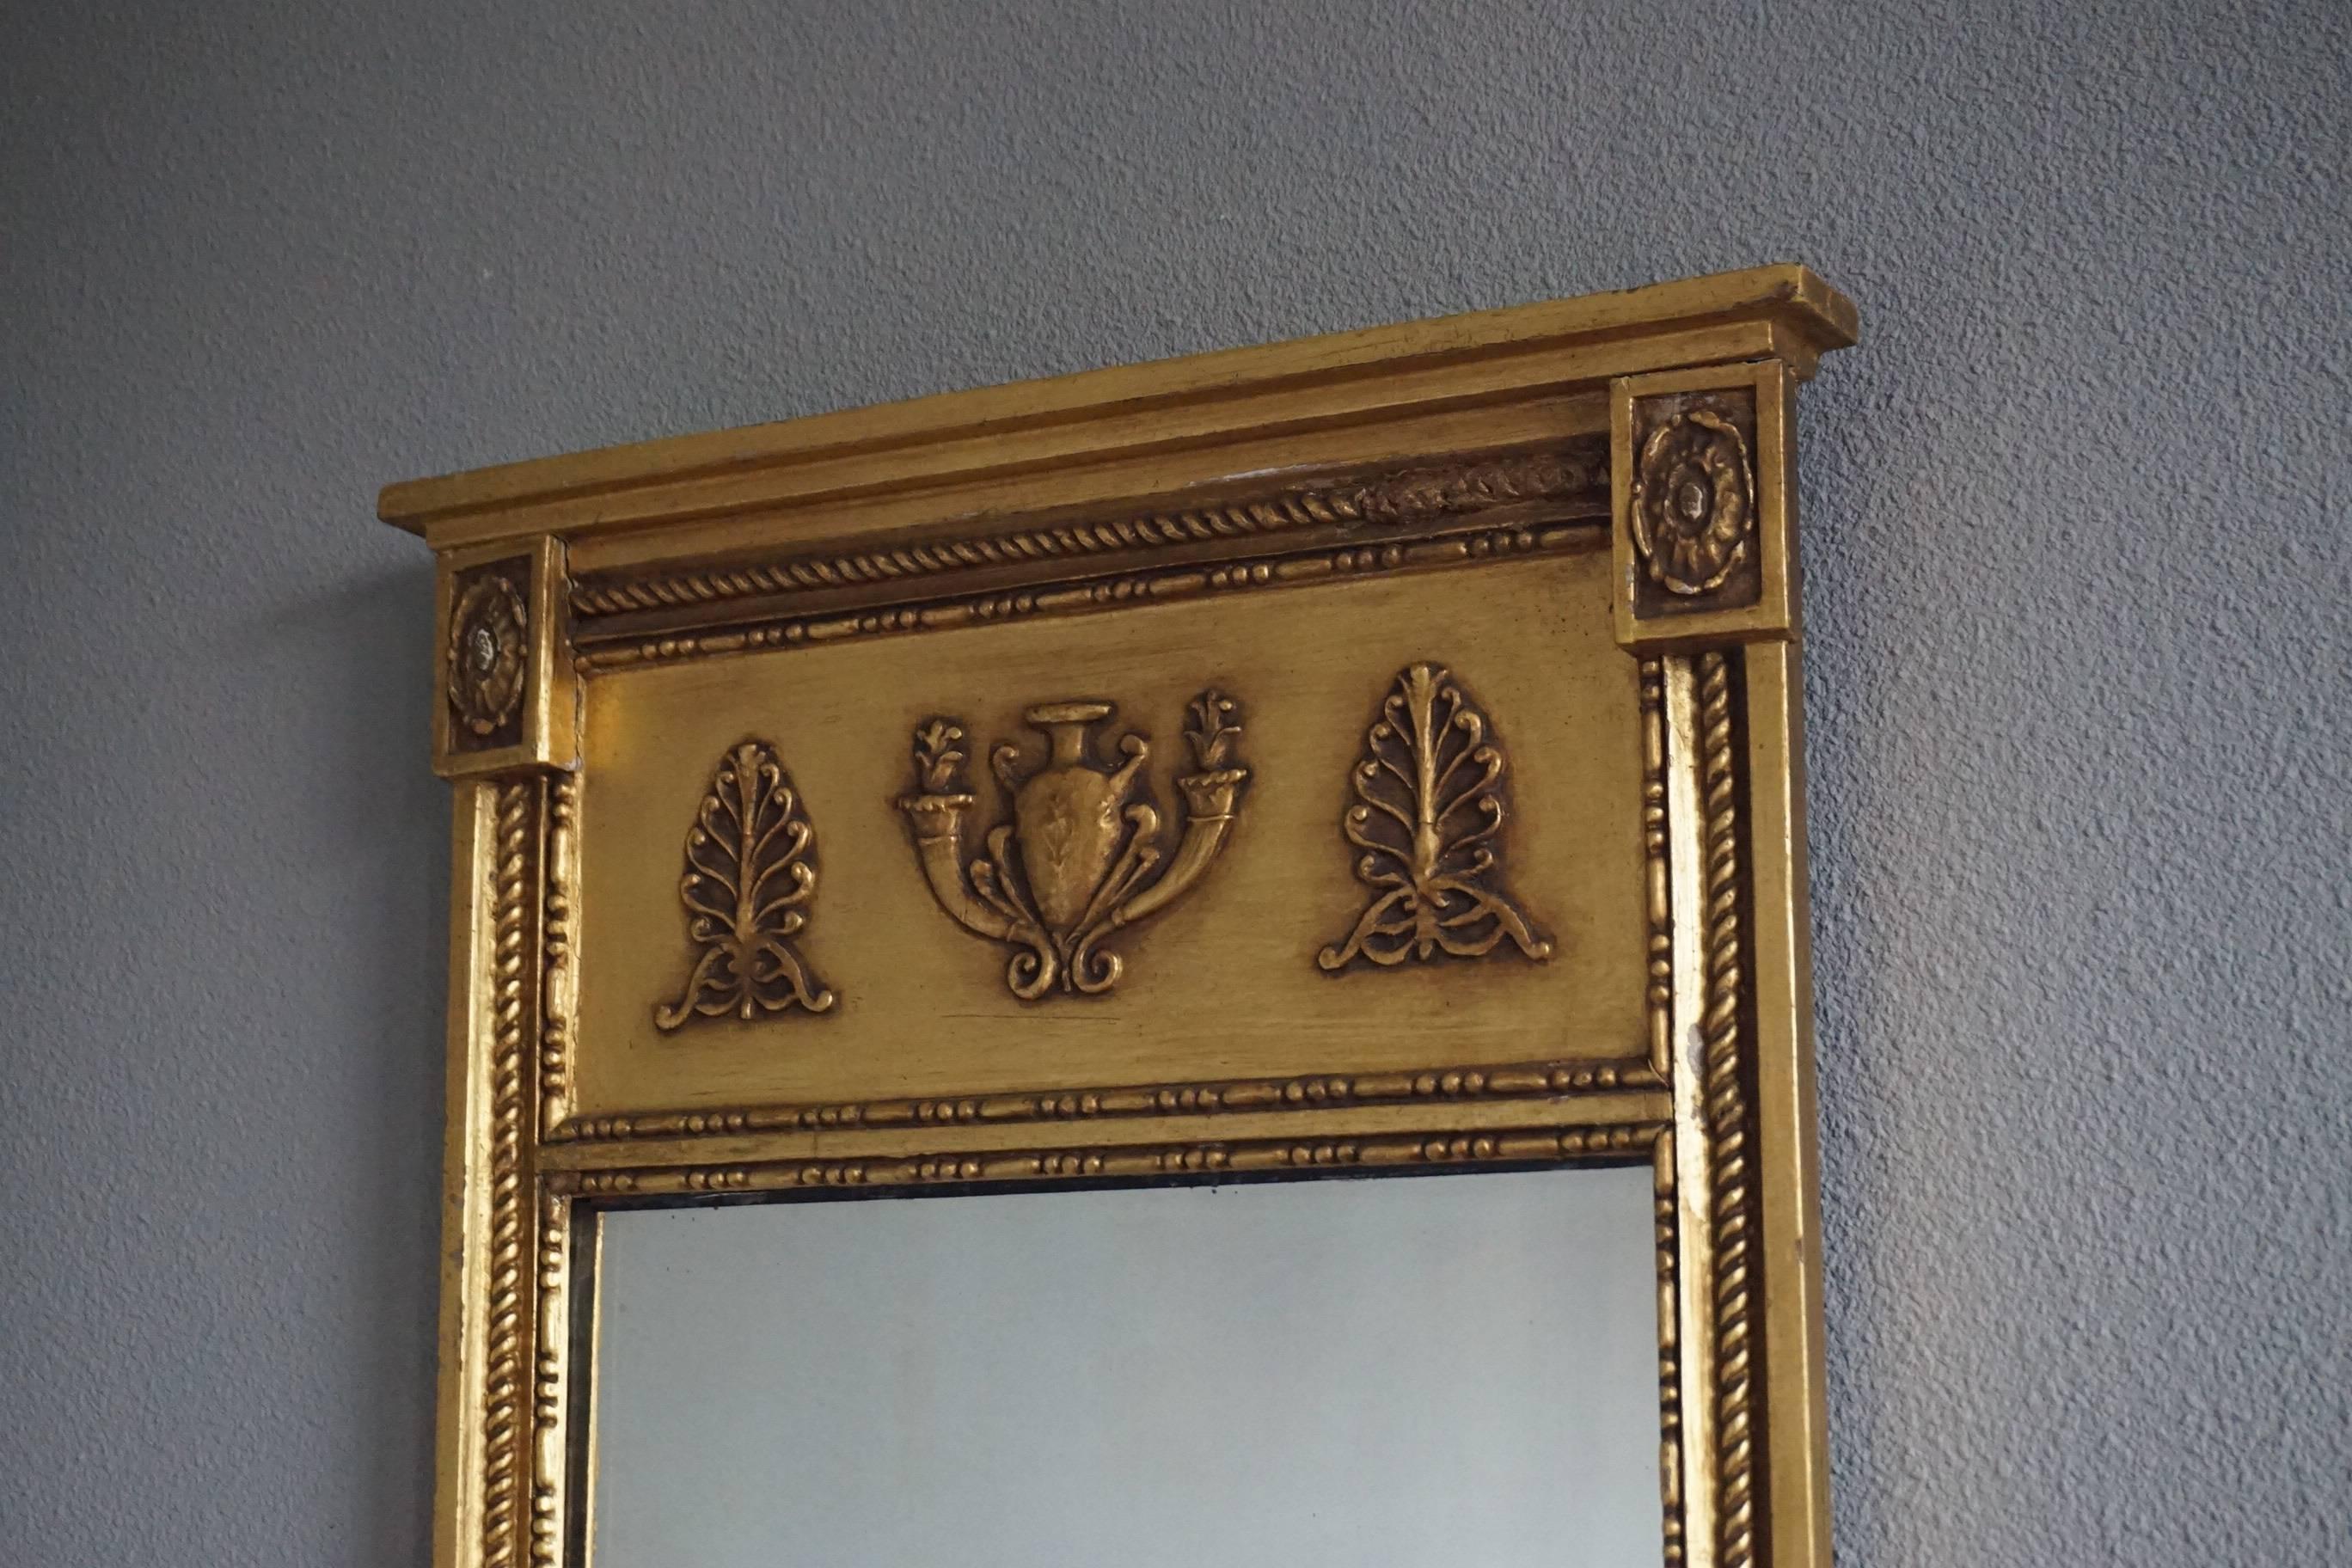 Empire Revival Mid-19th Century Antique and Gilt Empire/Napoleonic Style Mirror For Sale